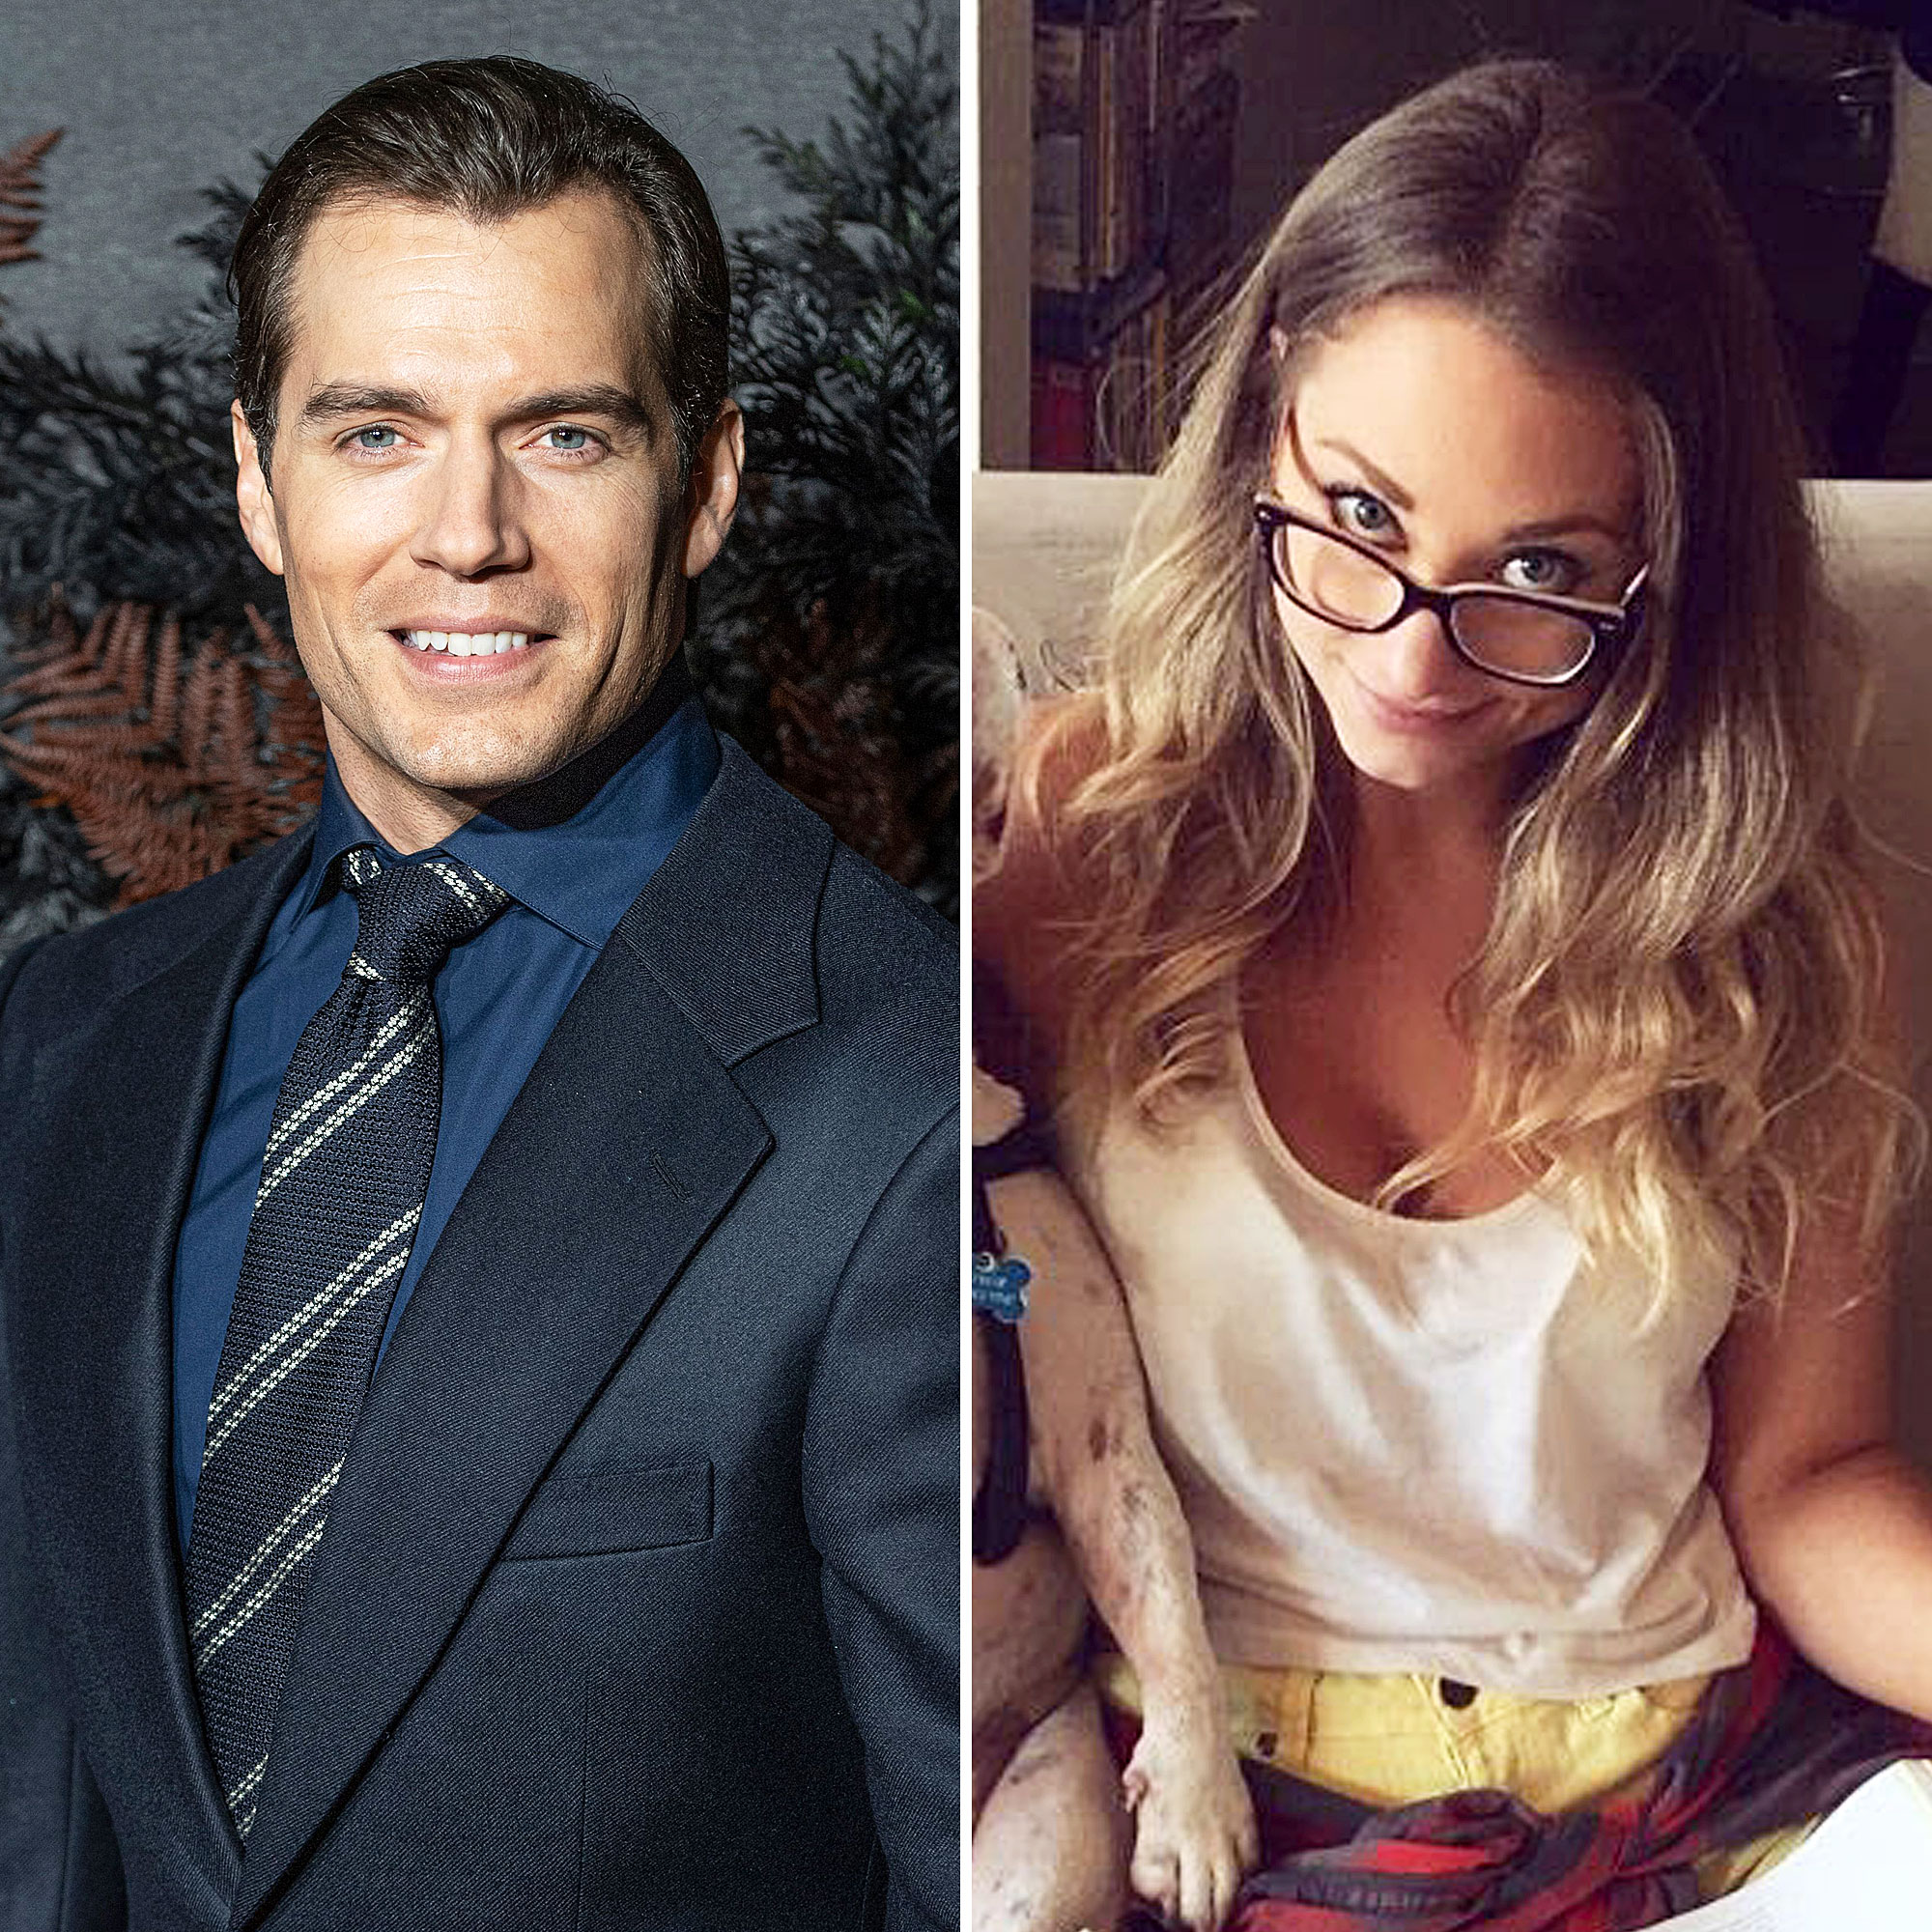 Who is Henry Cavill's girlfriend, Natalie Viscuso? The Hollywood